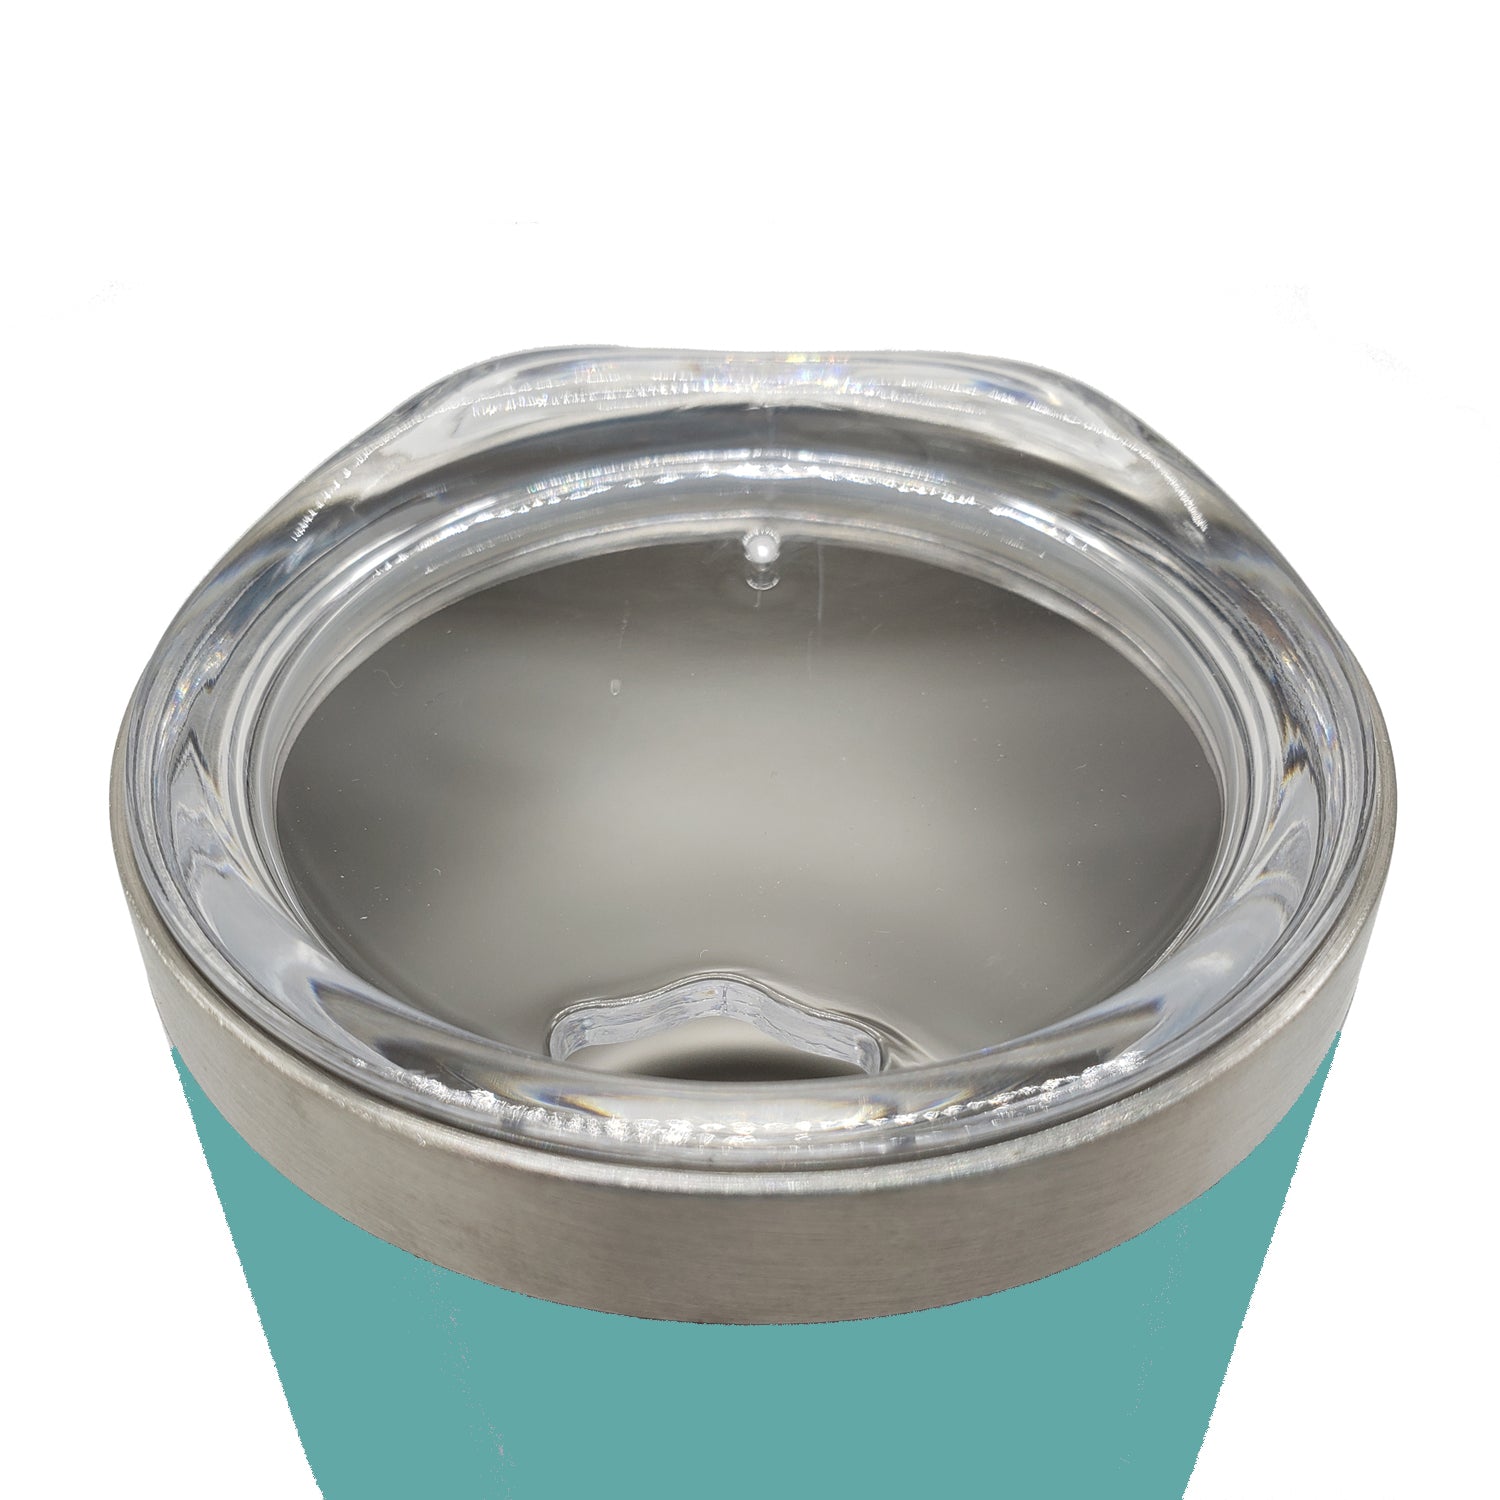 Lid for Docktails shatterproof insulated wine cup in Aquamarine